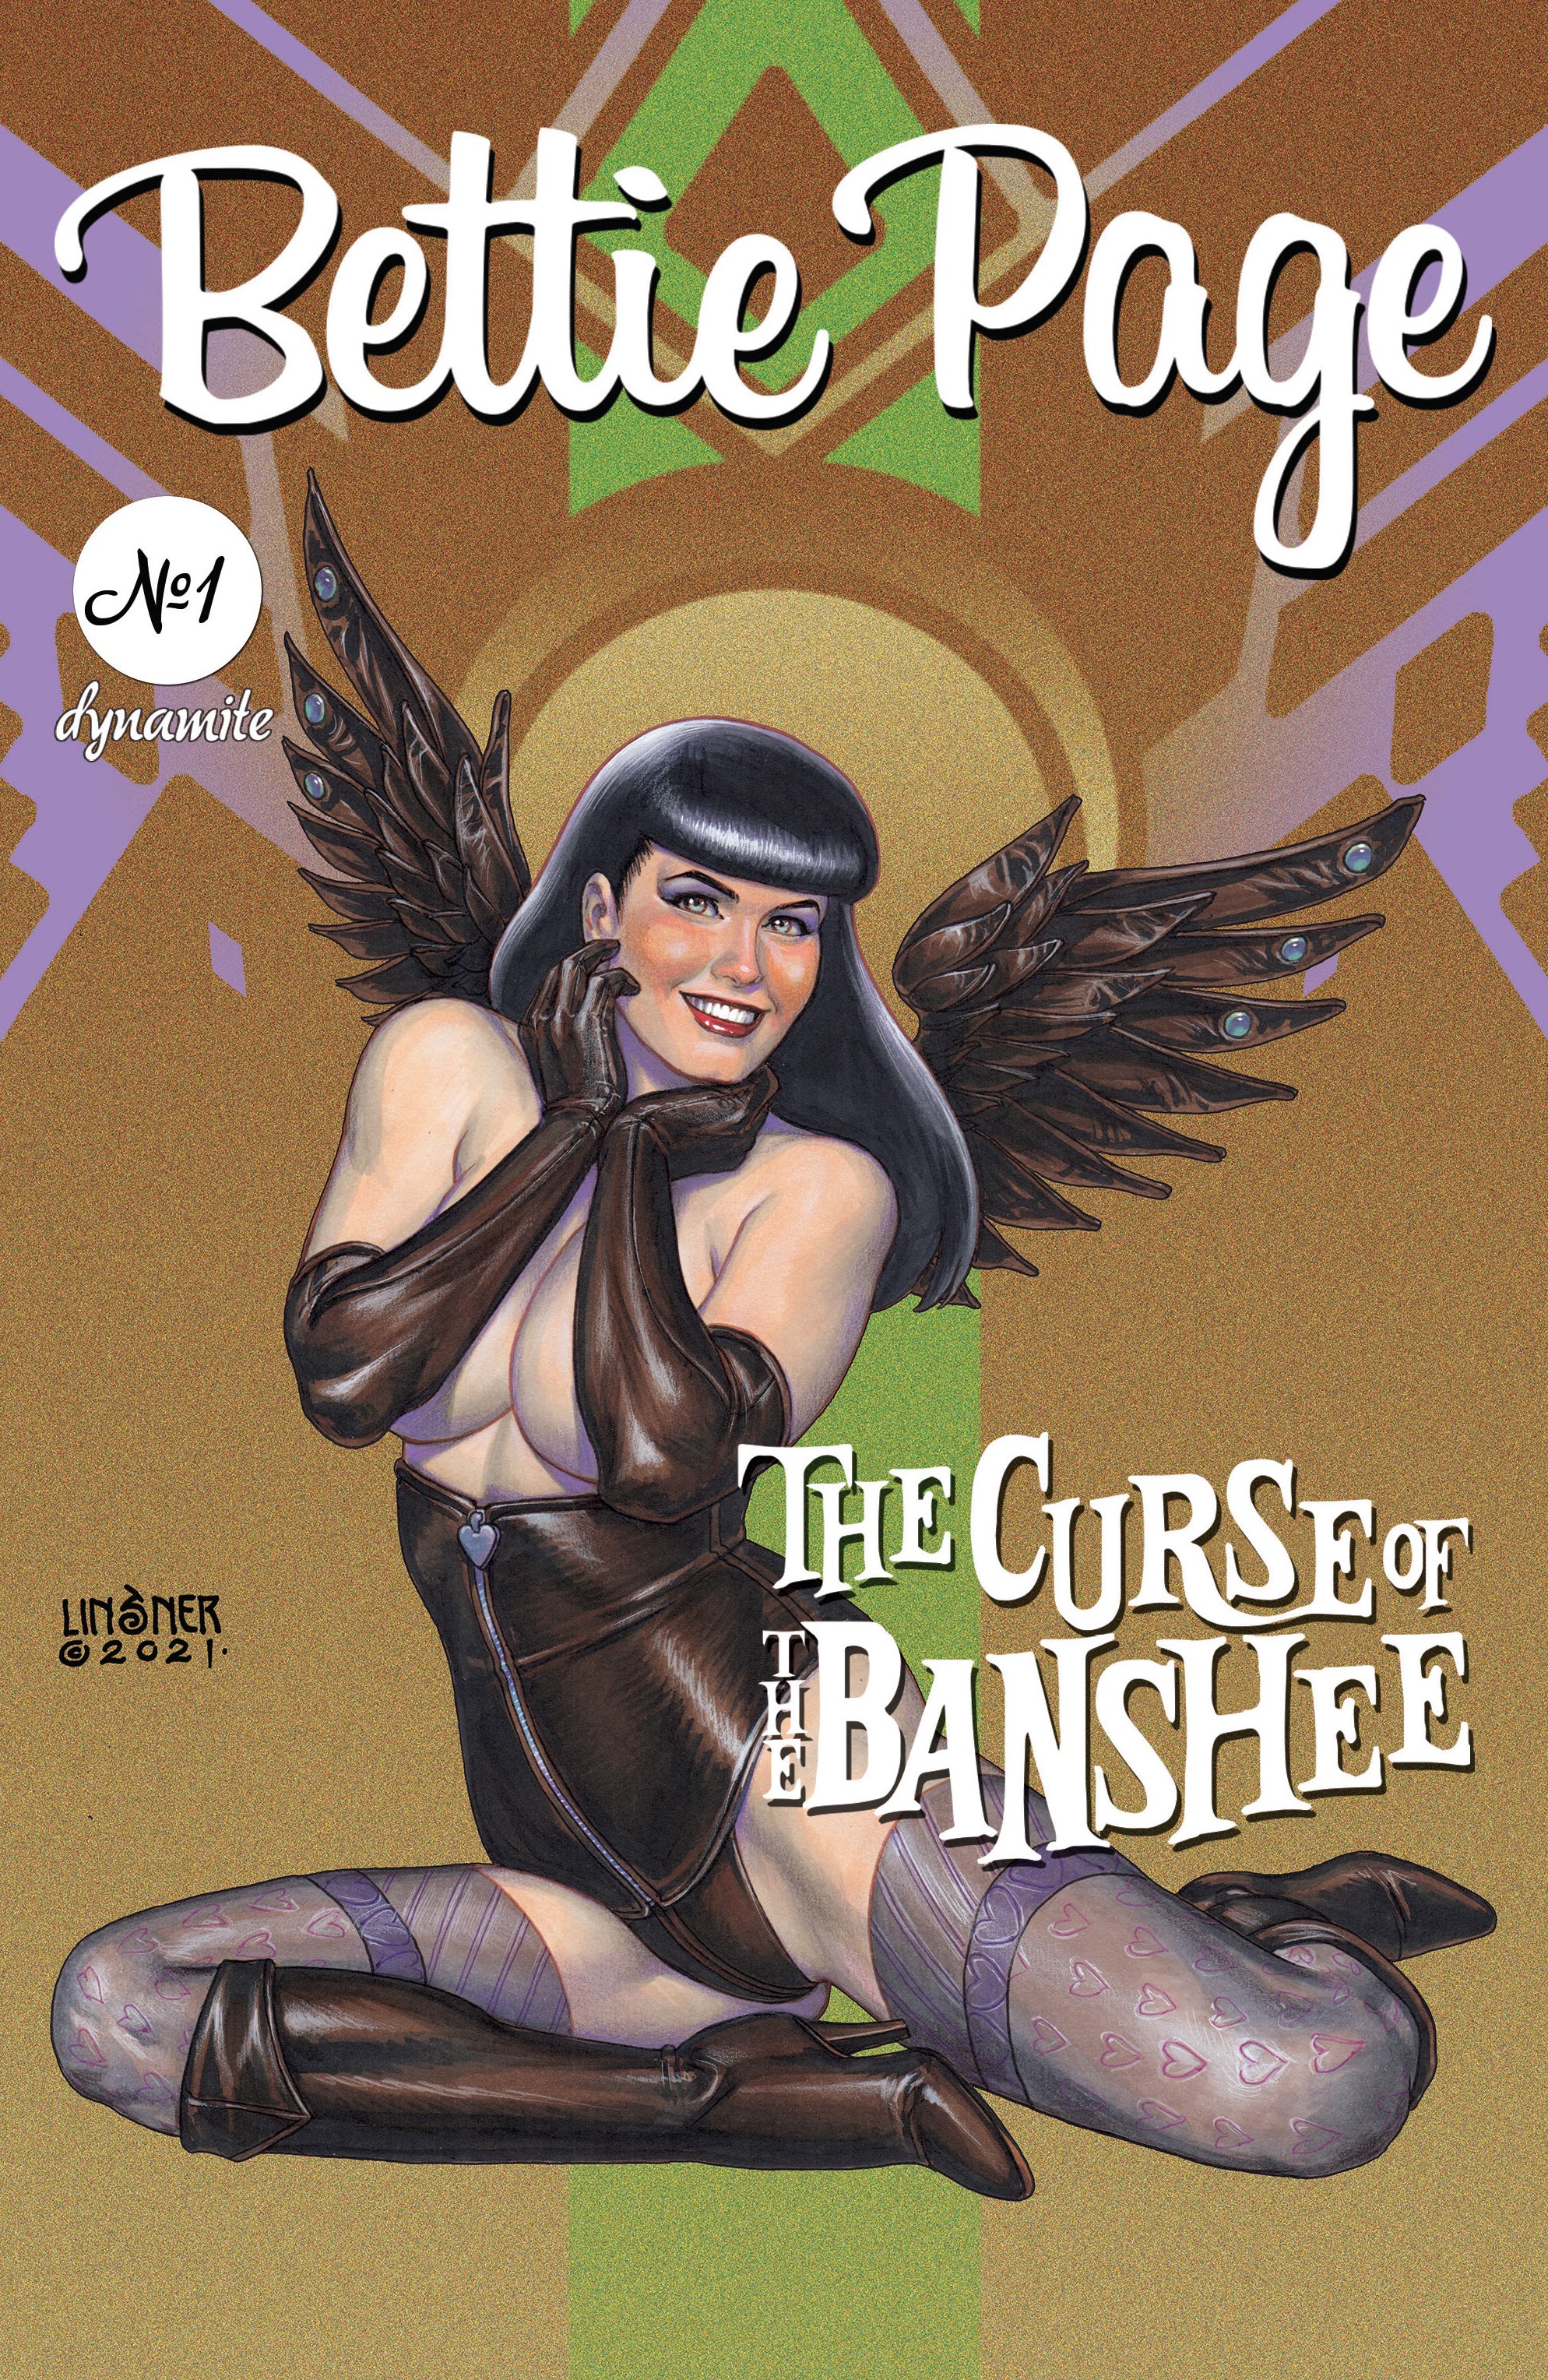 Read online Bettie Page & The Curse of the Banshee comic -  Issue #1 - 2